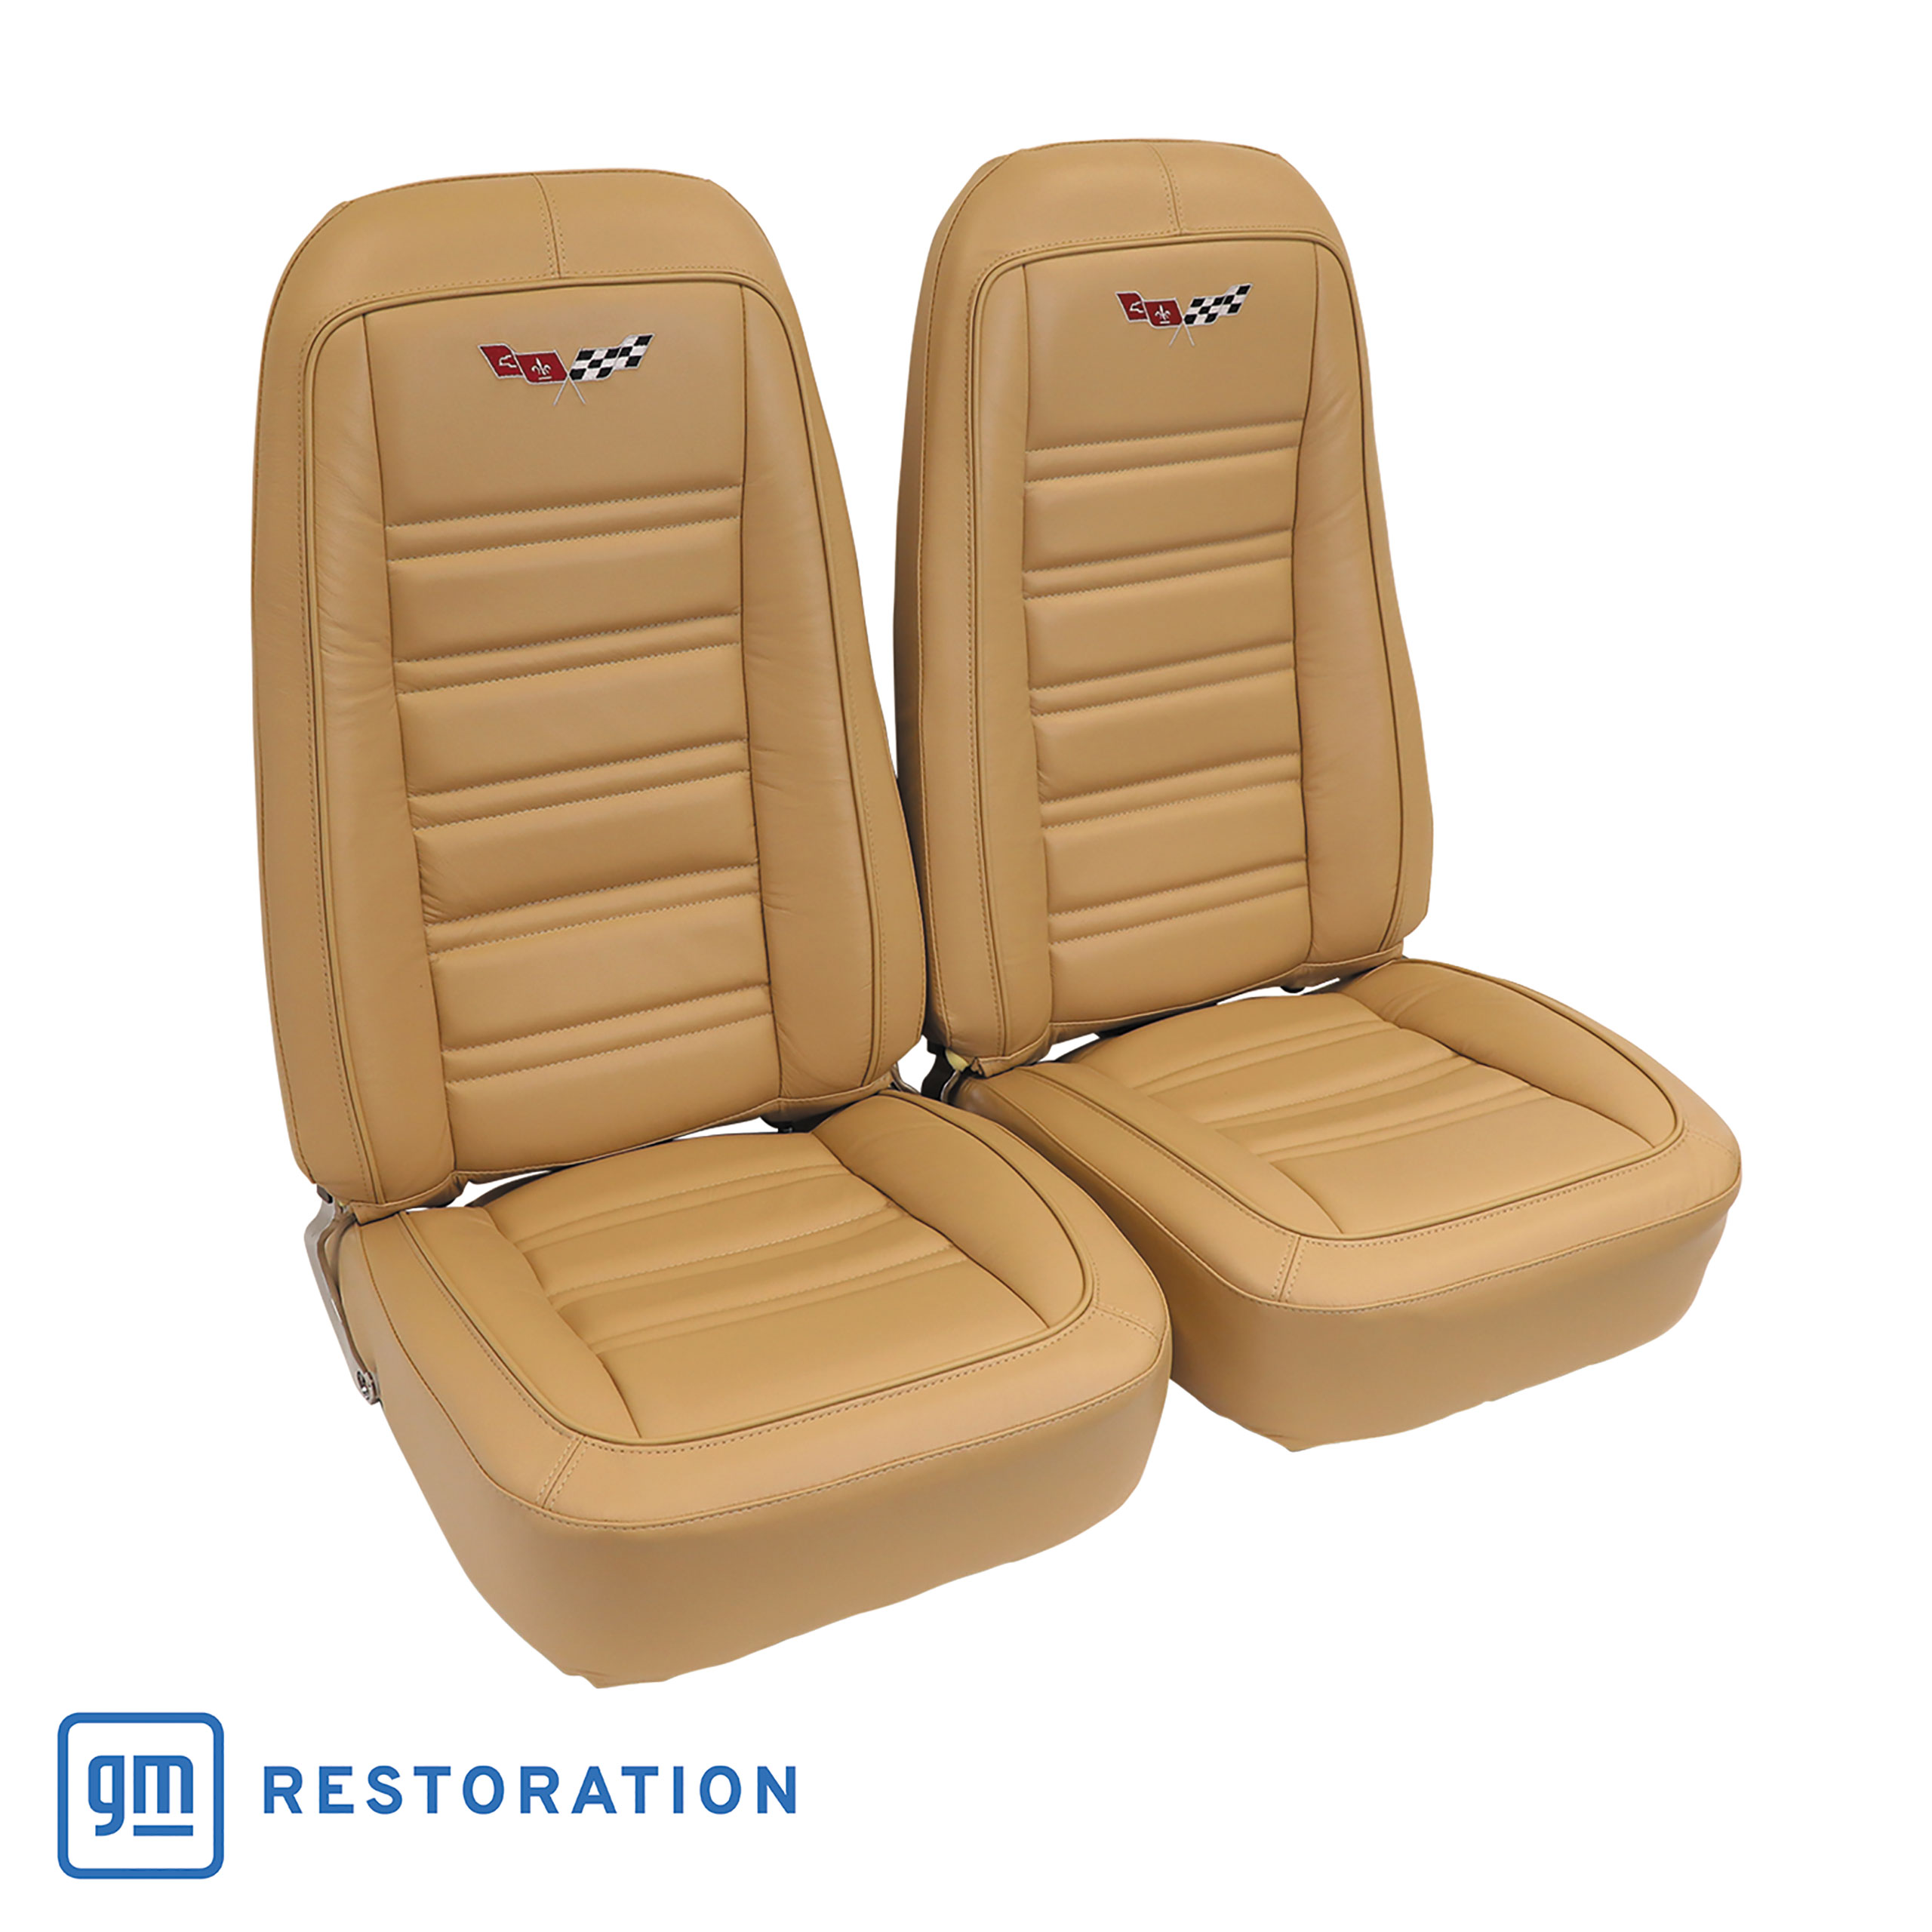 1978 C3 Corvette Embroidered 100% Leather Seat Covers - Doeskin